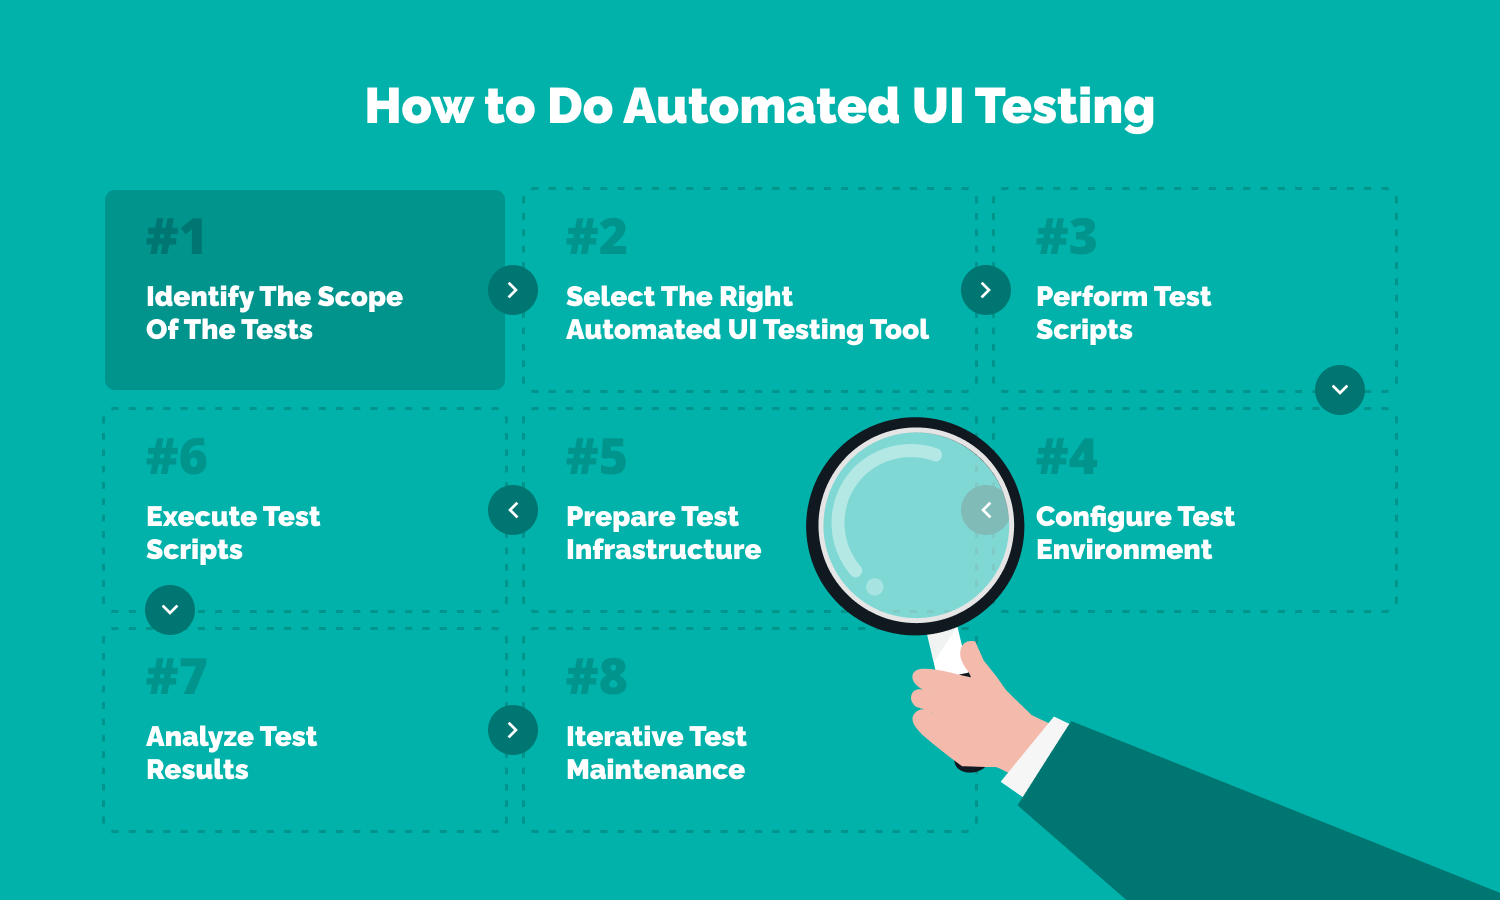 How to do automated UI testing